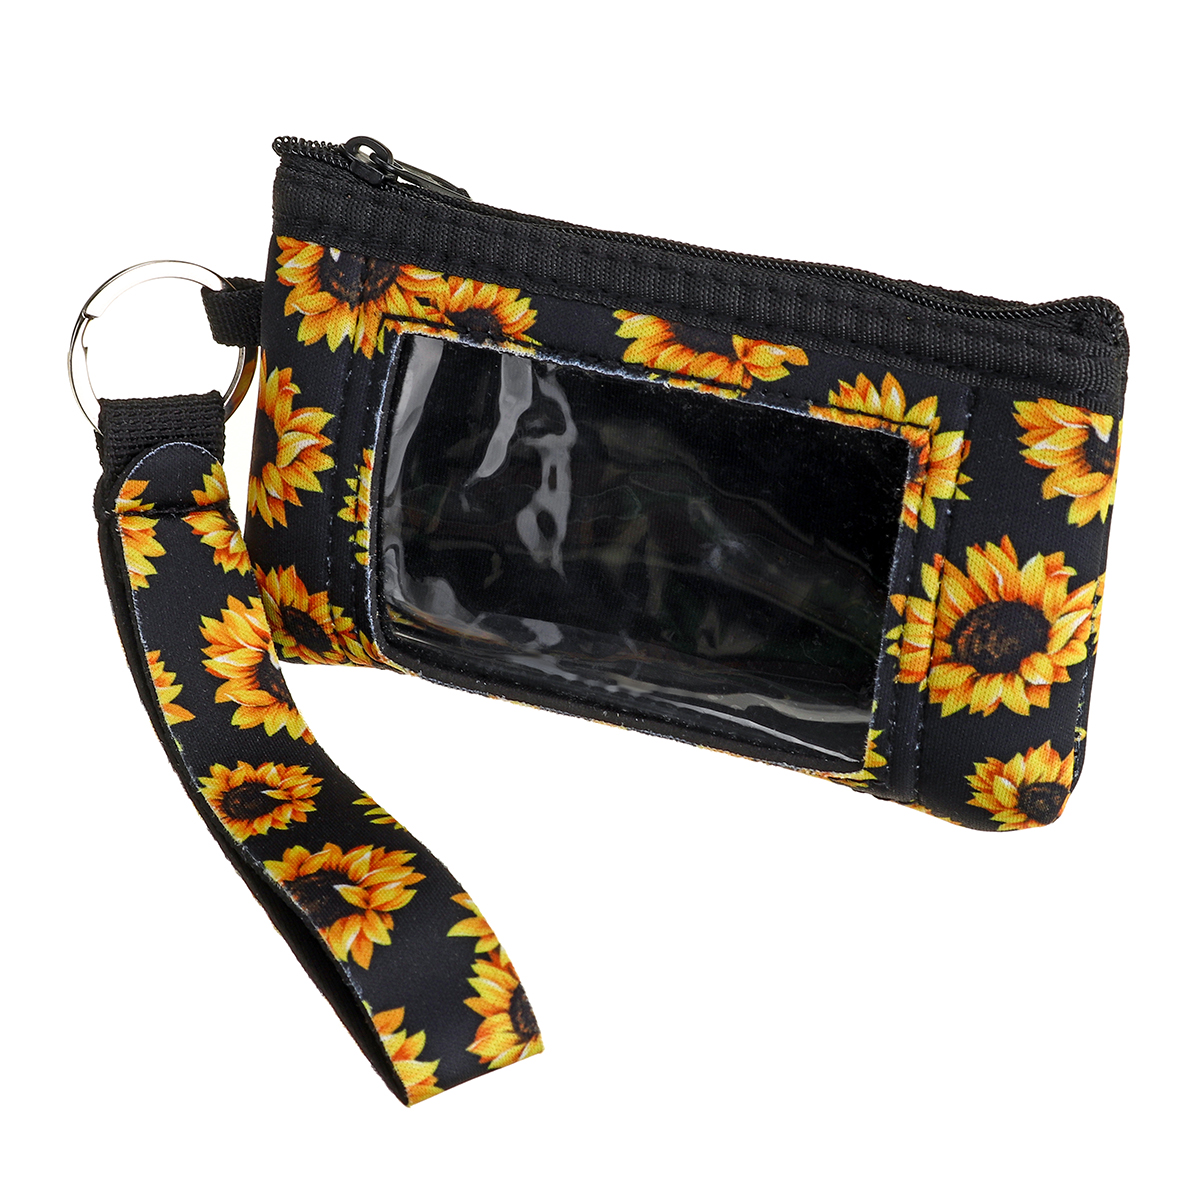 Sunflower-Pattern-Fashion-with-Zipper-PVC-Window-Female-Coin-Pouch-Small-Change-Bags-Purse-1806355-2